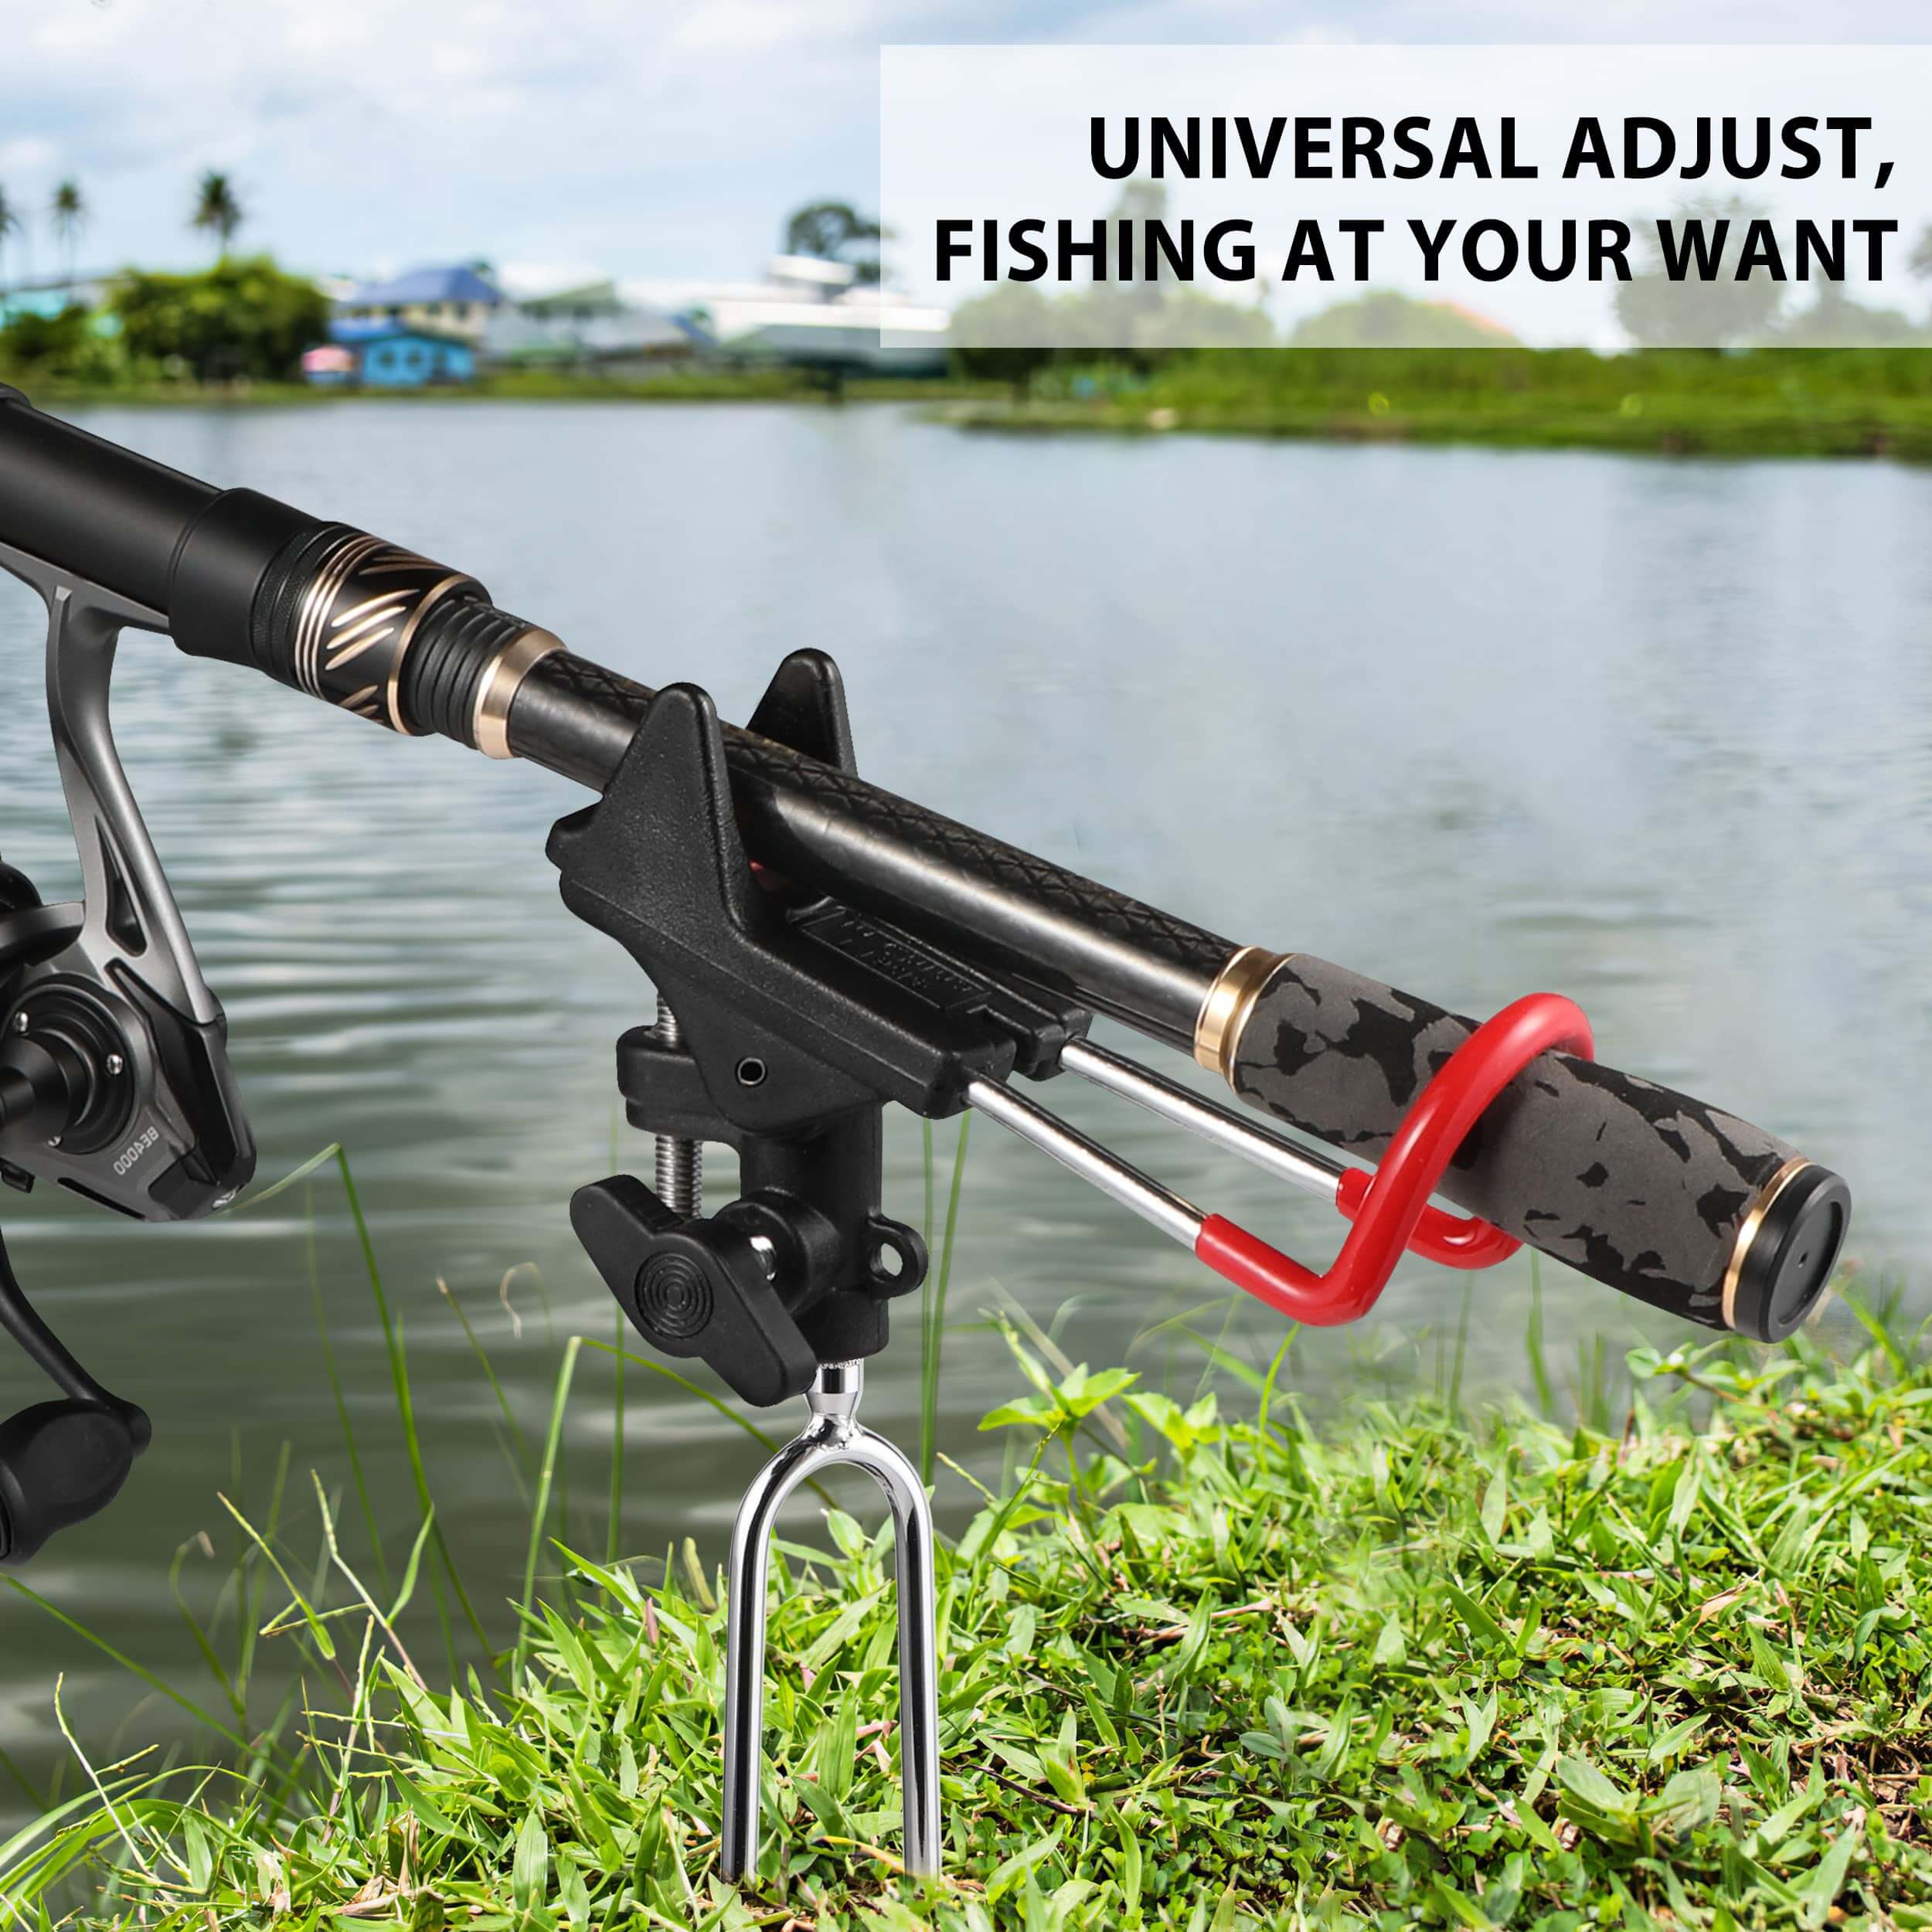 Fishing Rod Rack 360 Degrees Adjustable for Bank Fishing (Red